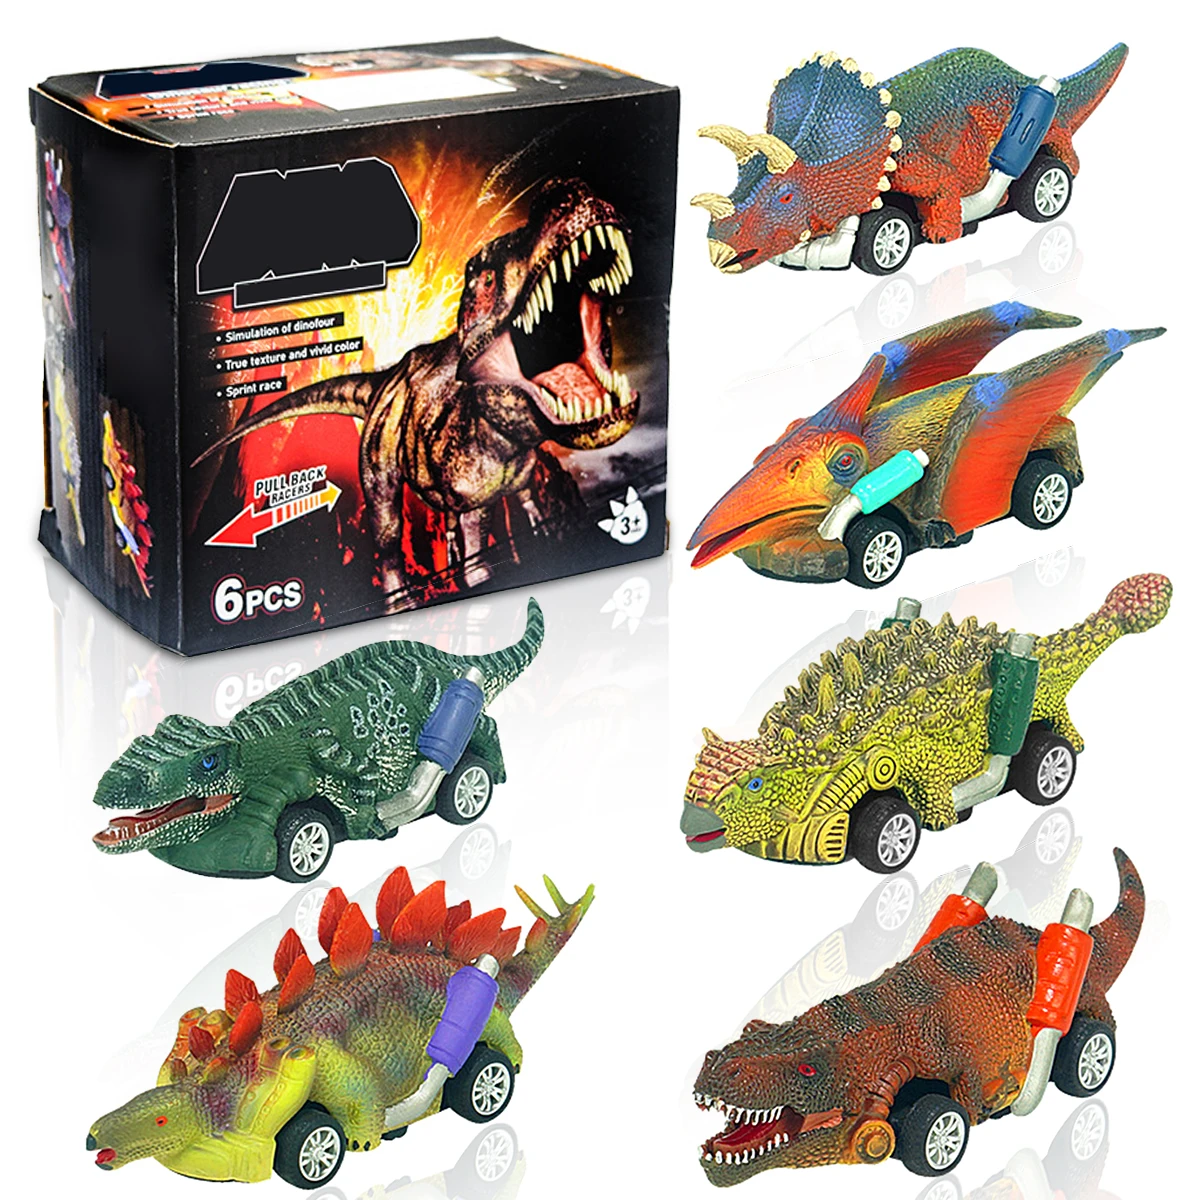 6Pcs Dinosaur Pull Back Car Toys for Toddlers Ages 2-6 Year Old T Rex Dinosaur Pull Back Vehicles Cars Truck Toys for Kids Gift